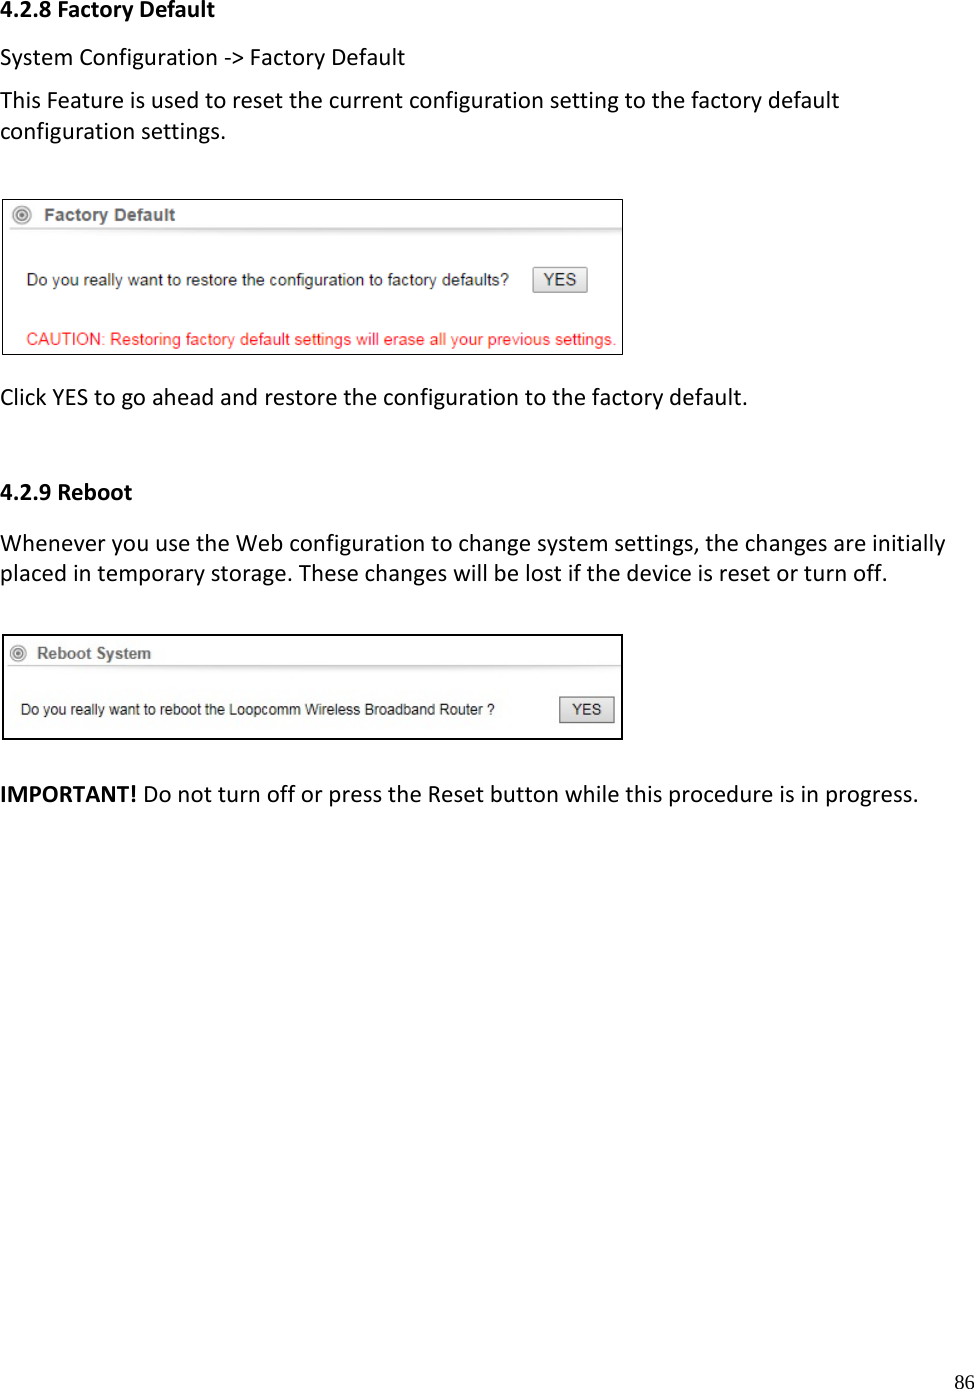 86  4.2.8 Factory Default System Configuration -&gt; Factory Default  This Feature is used to reset the current configuration setting to the factory default configuration settings.   Click YES to go ahead and restore the configuration to the factory default.   4.2.9 Reboot Whenever you use the Web configuration to change system settings, the changes are initially placed in temporary storage. These changes will be lost if the device is reset or turn off.       IMPORTANT! Do not turn off or press the Reset button while this procedure is in progress.      